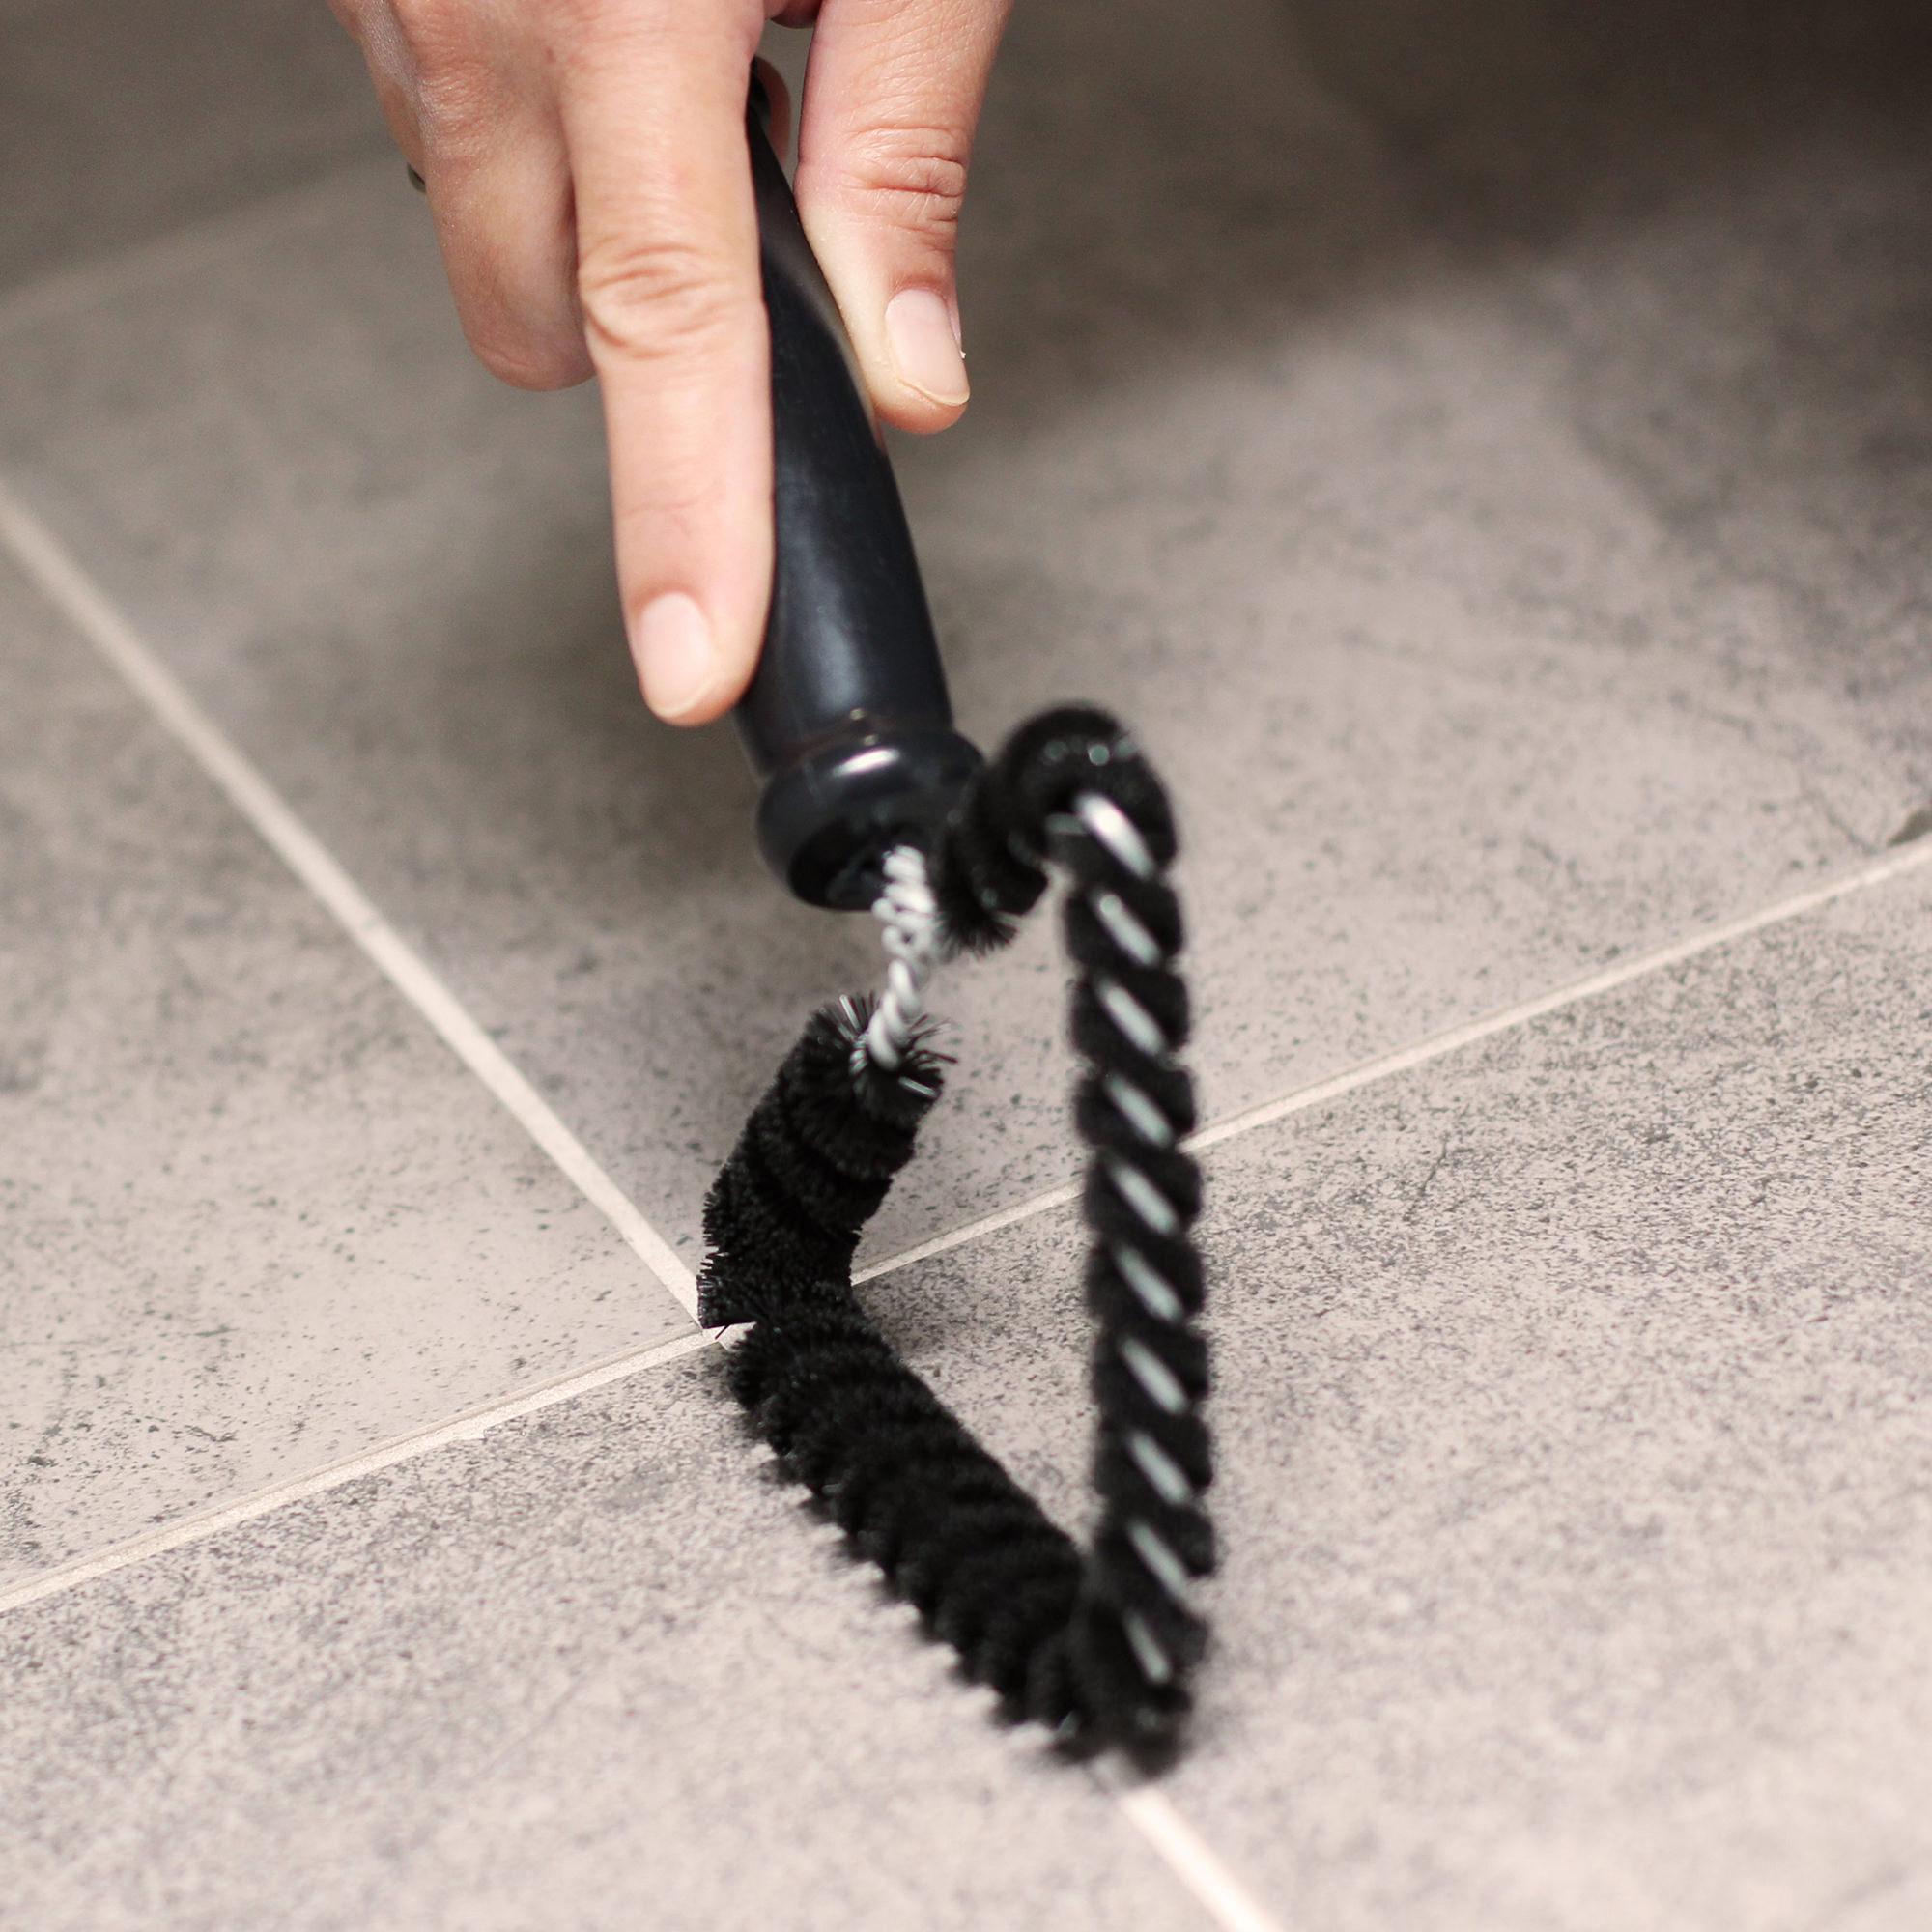 White Magic Super Sturdy Grout Cleaning Brush Black Image 3